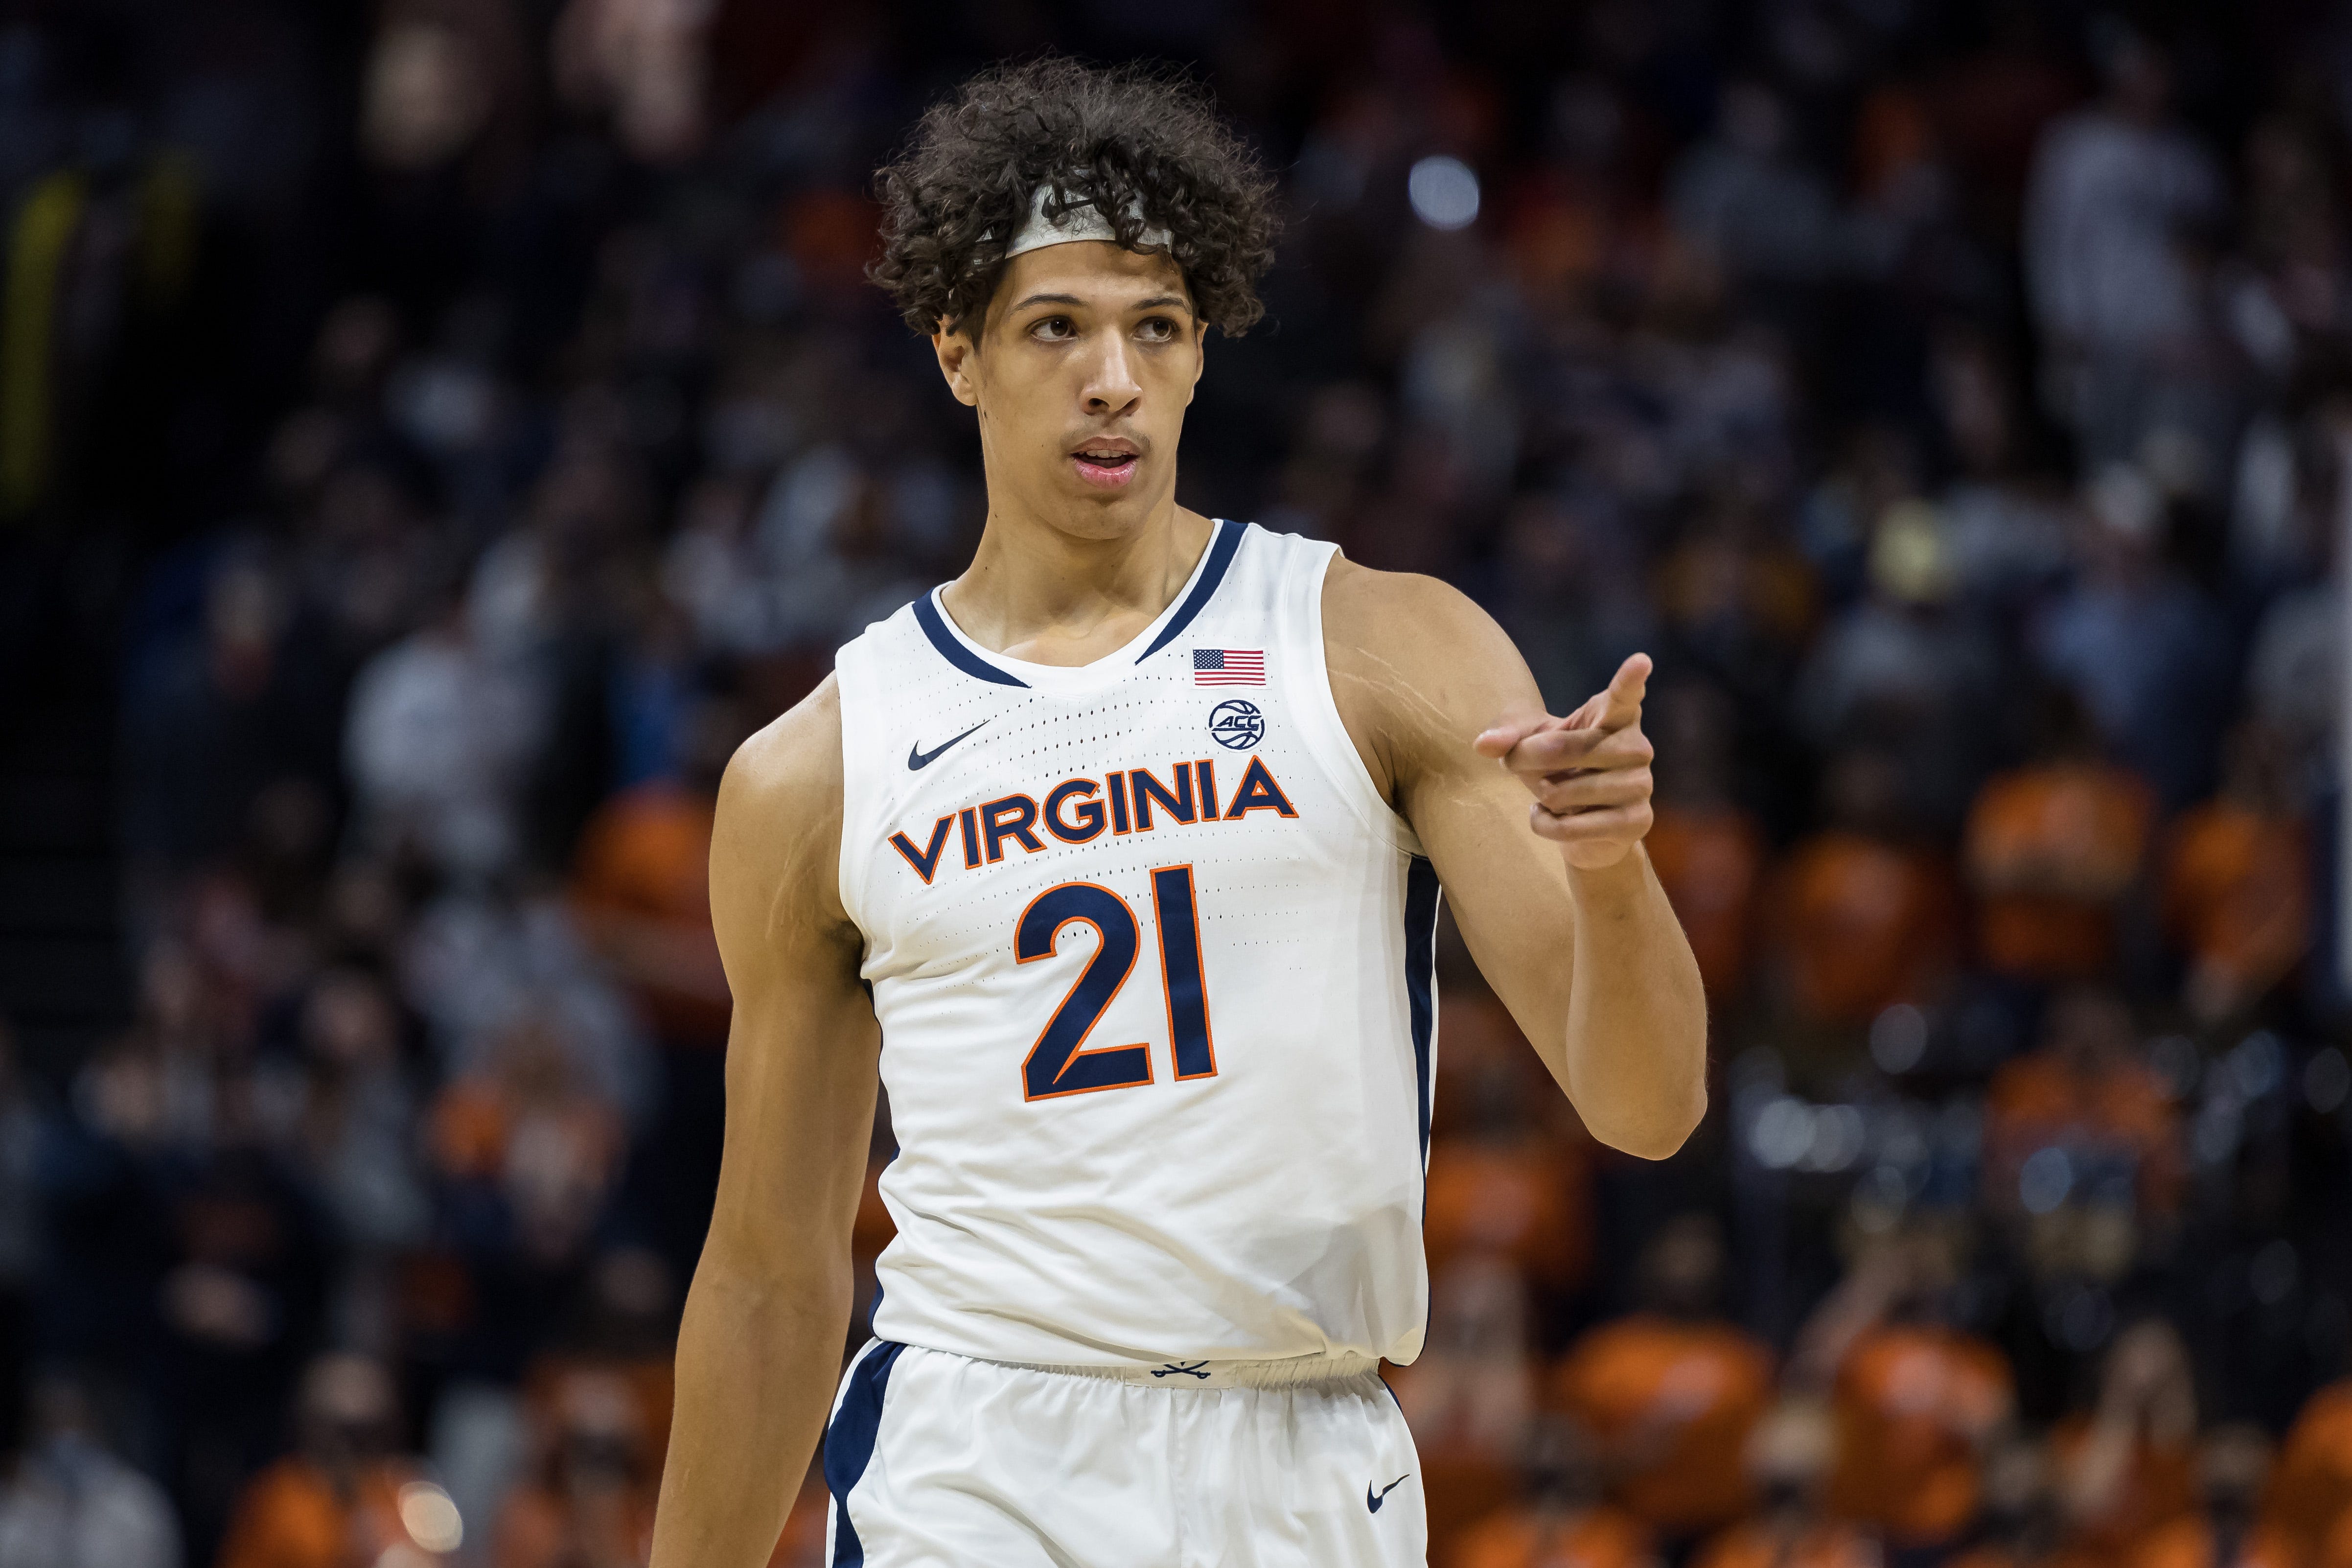 Virginia Cavaliers forward Kadin Shedrick (21) reacts after a play against the Iowa Hawkeyes during the second half, Monday, Nov. 29, 2021, at John Paul Jones Arena in Charlottesville, Va.